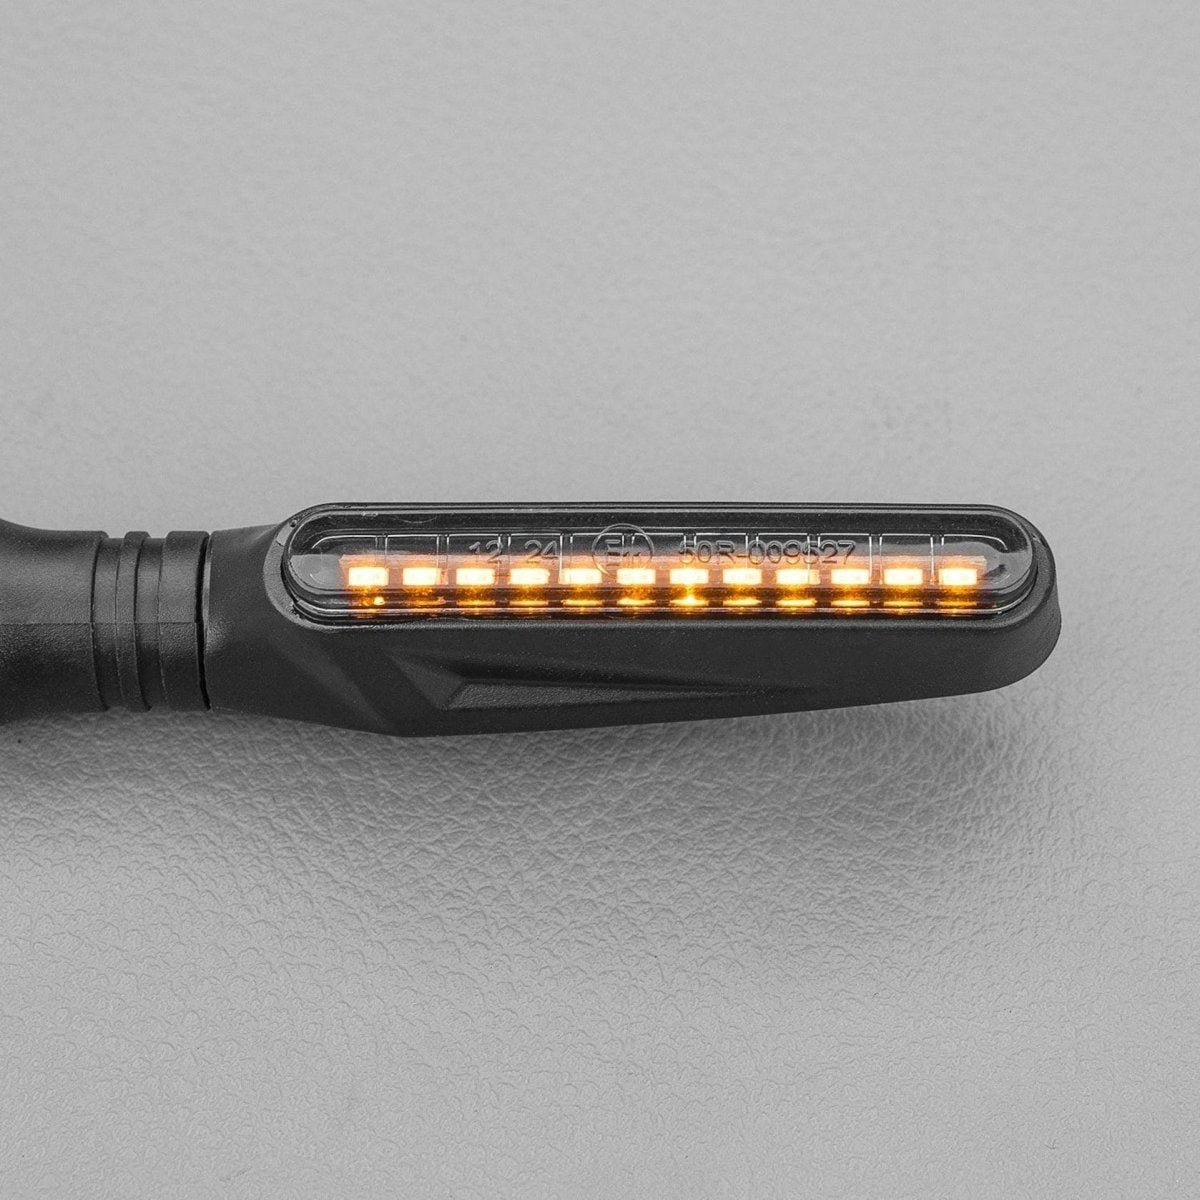 STEDI Dynamic Motorcycle LED Indicator (Pair) - NZ Offroader